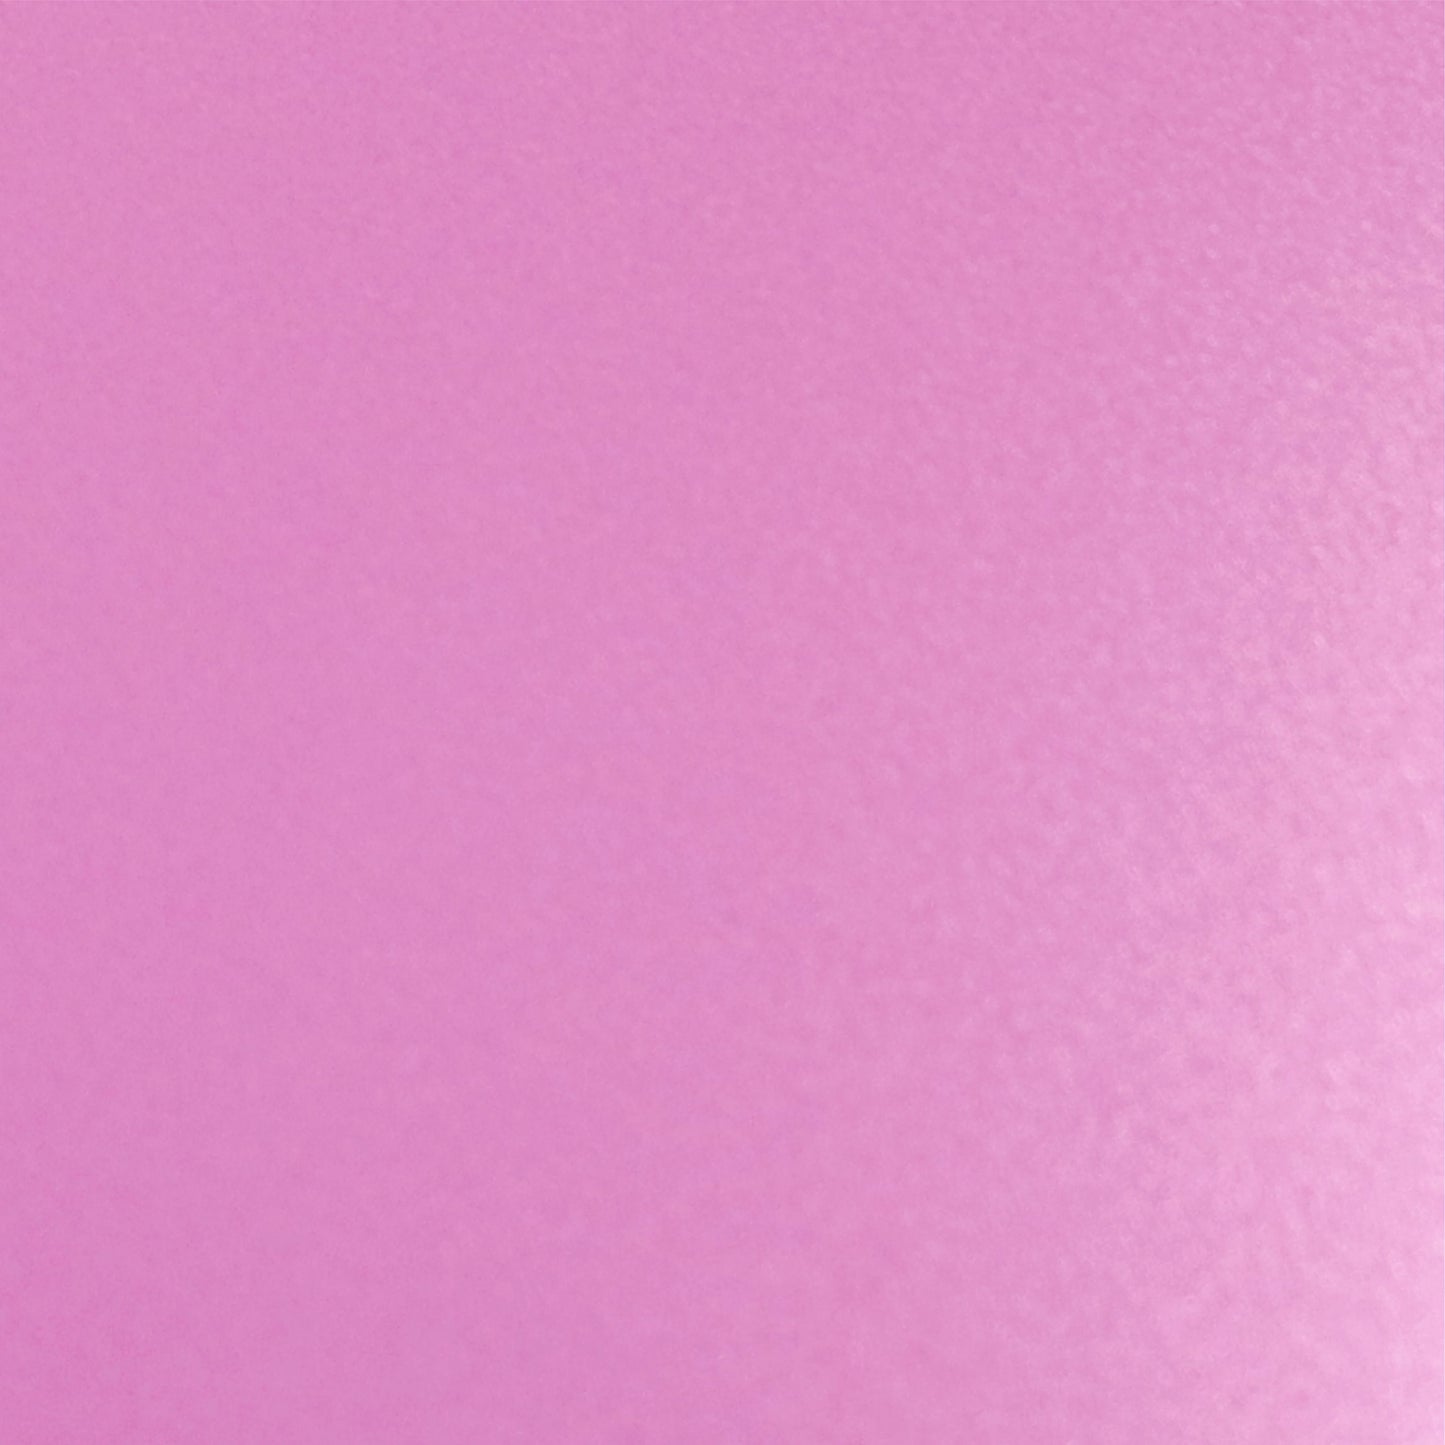 DecoFilm Paint FX Pink 12x15 HTV CLEARANCE